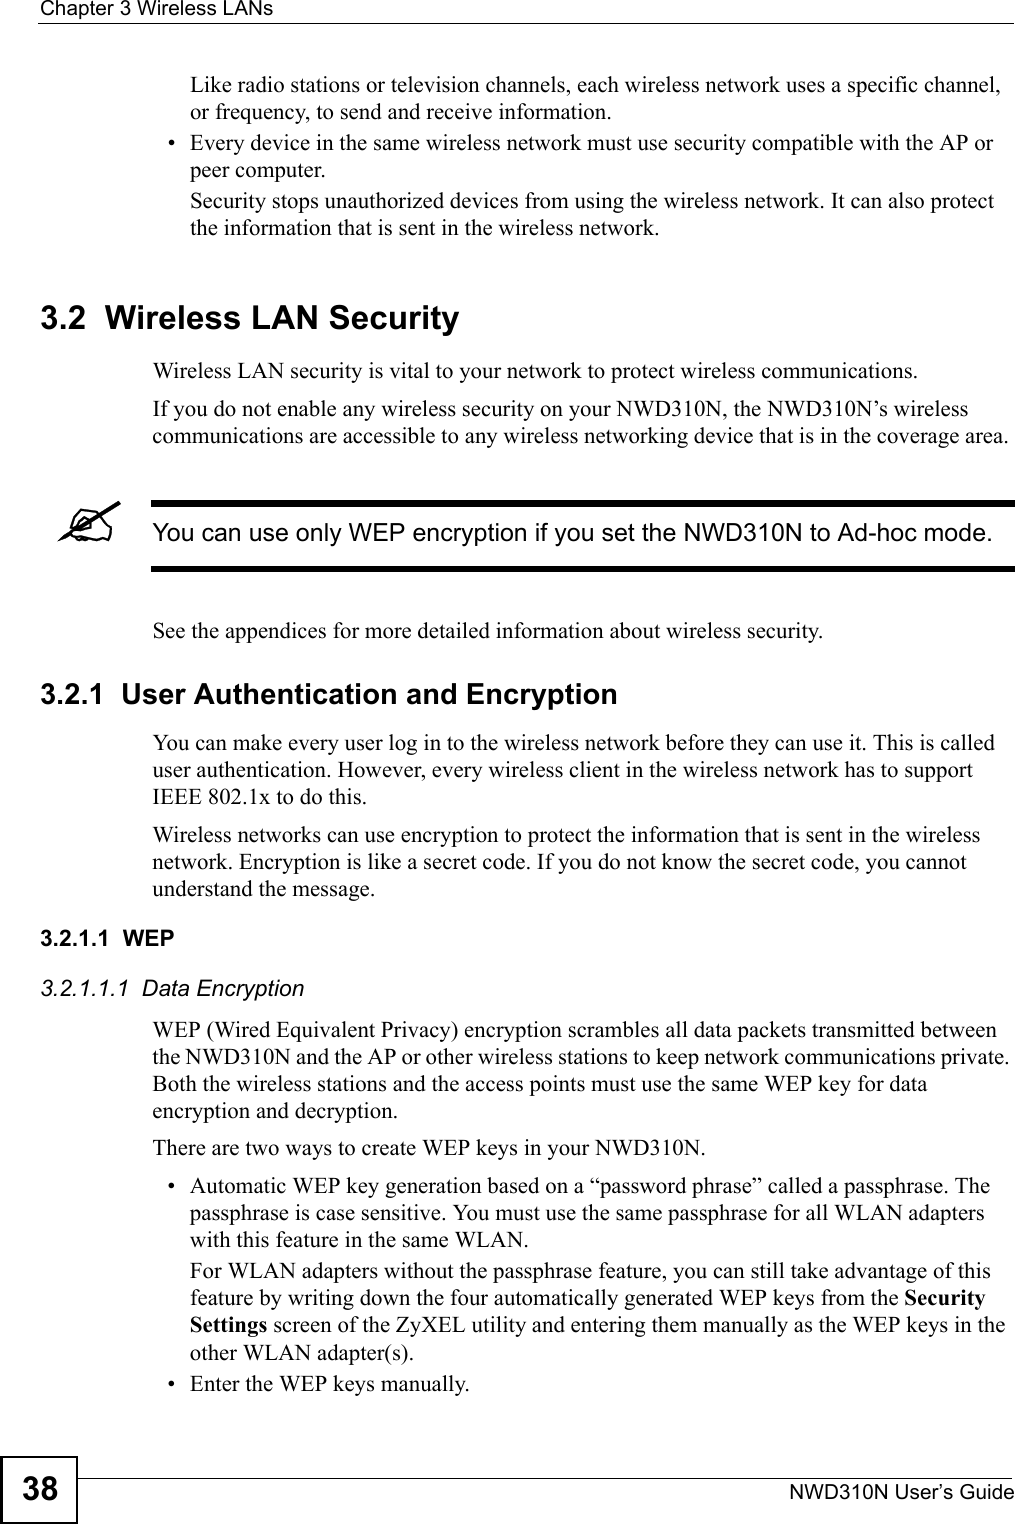 Chapter 3 Wireless LANsNWD310N User’s Guide38Like radio stations or television channels, each wireless network uses a specific channel, or frequency, to send and receive information.• Every device in the same wireless network must use security compatible with the AP or peer computer.Security stops unauthorized devices from using the wireless network. It can also protect the information that is sent in the wireless network.3.2  Wireless LAN Security Wireless LAN security is vital to your network to protect wireless communications.If you do not enable any wireless security on your NWD310N, the NWD310N’s wireless communications are accessible to any wireless networking device that is in the coverage area. &quot;You can use only WEP encryption if you set the NWD310N to Ad-hoc mode.See the appendices for more detailed information about wireless security.3.2.1  User Authentication and EncryptionYou can make every user log in to the wireless network before they can use it. This is called user authentication. However, every wireless client in the wireless network has to support IEEE 802.1x to do this.Wireless networks can use encryption to protect the information that is sent in the wireless network. Encryption is like a secret code. If you do not know the secret code, you cannot understand the message.3.2.1.1  WEP3.2.1.1.1  Data Encryption WEP (Wired Equivalent Privacy) encryption scrambles all data packets transmitted between the NWD310N and the AP or other wireless stations to keep network communications private. Both the wireless stations and the access points must use the same WEP key for data encryption and decryption.There are two ways to create WEP keys in your NWD310N.• Automatic WEP key generation based on a “password phrase” called a passphrase. The passphrase is case sensitive. You must use the same passphrase for all WLAN adapters with this feature in the same WLAN.For WLAN adapters without the passphrase feature, you can still take advantage of this feature by writing down the four automatically generated WEP keys from the Security Settings screen of the ZyXEL utility and entering them manually as the WEP keys in the other WLAN adapter(s).• Enter the WEP keys manually.